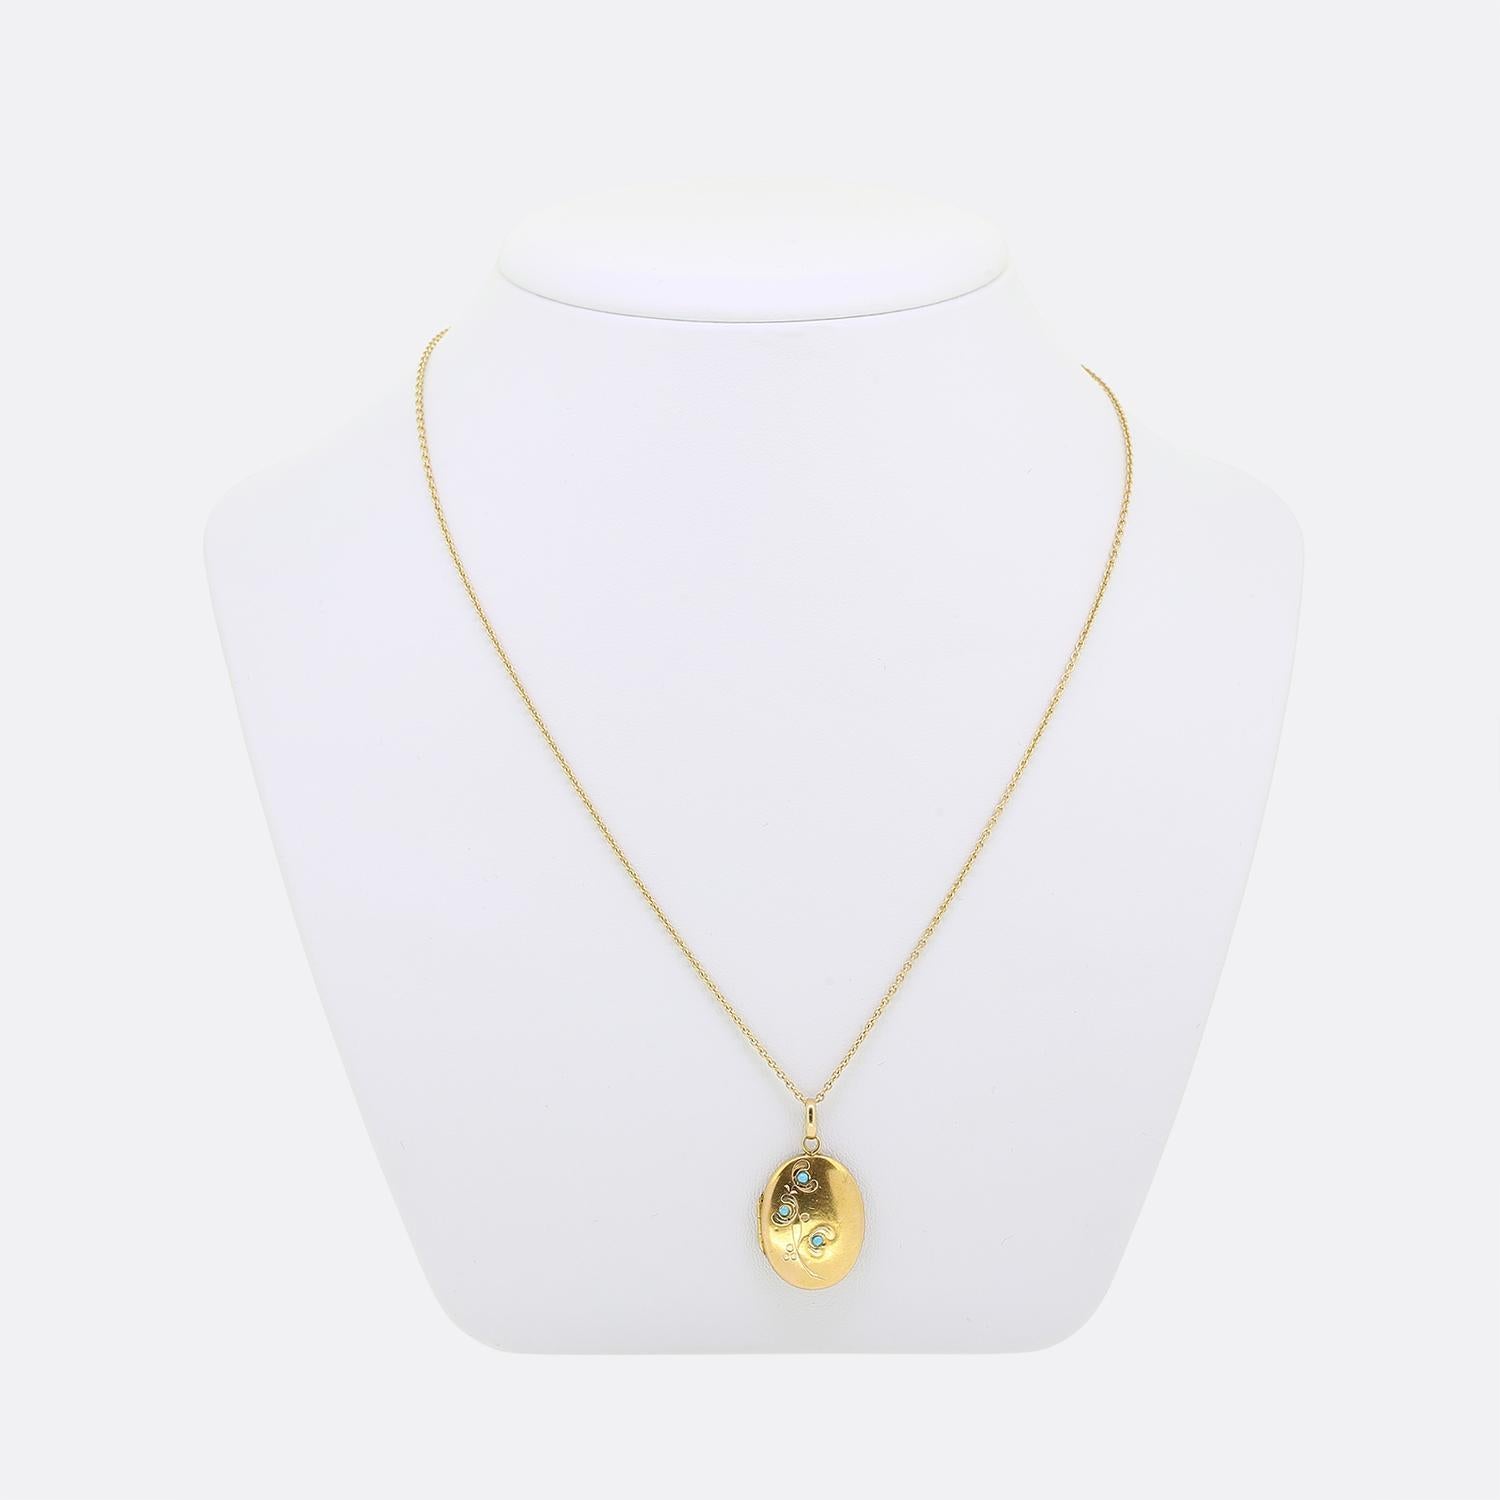 Here we have a lovely locket necklace. This antique locket has been crafted from 18ct yellow gold into an oval shape and expertly engraved with a curvaceous floral design whilst being set with a trio of round shaped turquoise. The reverse side